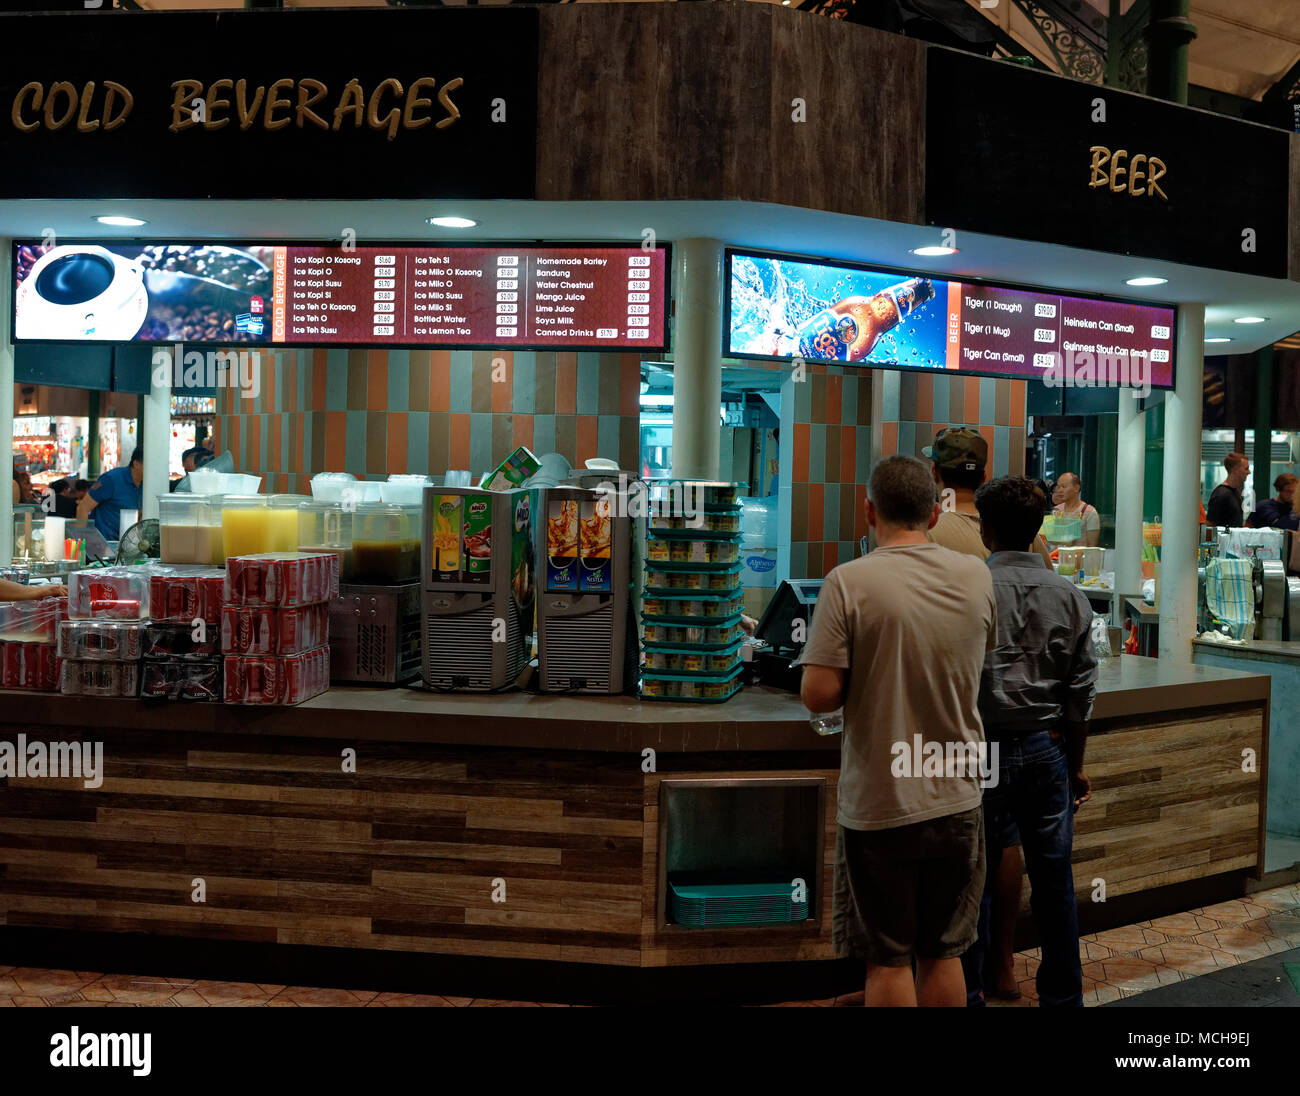 Lau Pa Sat, outdoor hawker stalls in Singapore Stock Photo